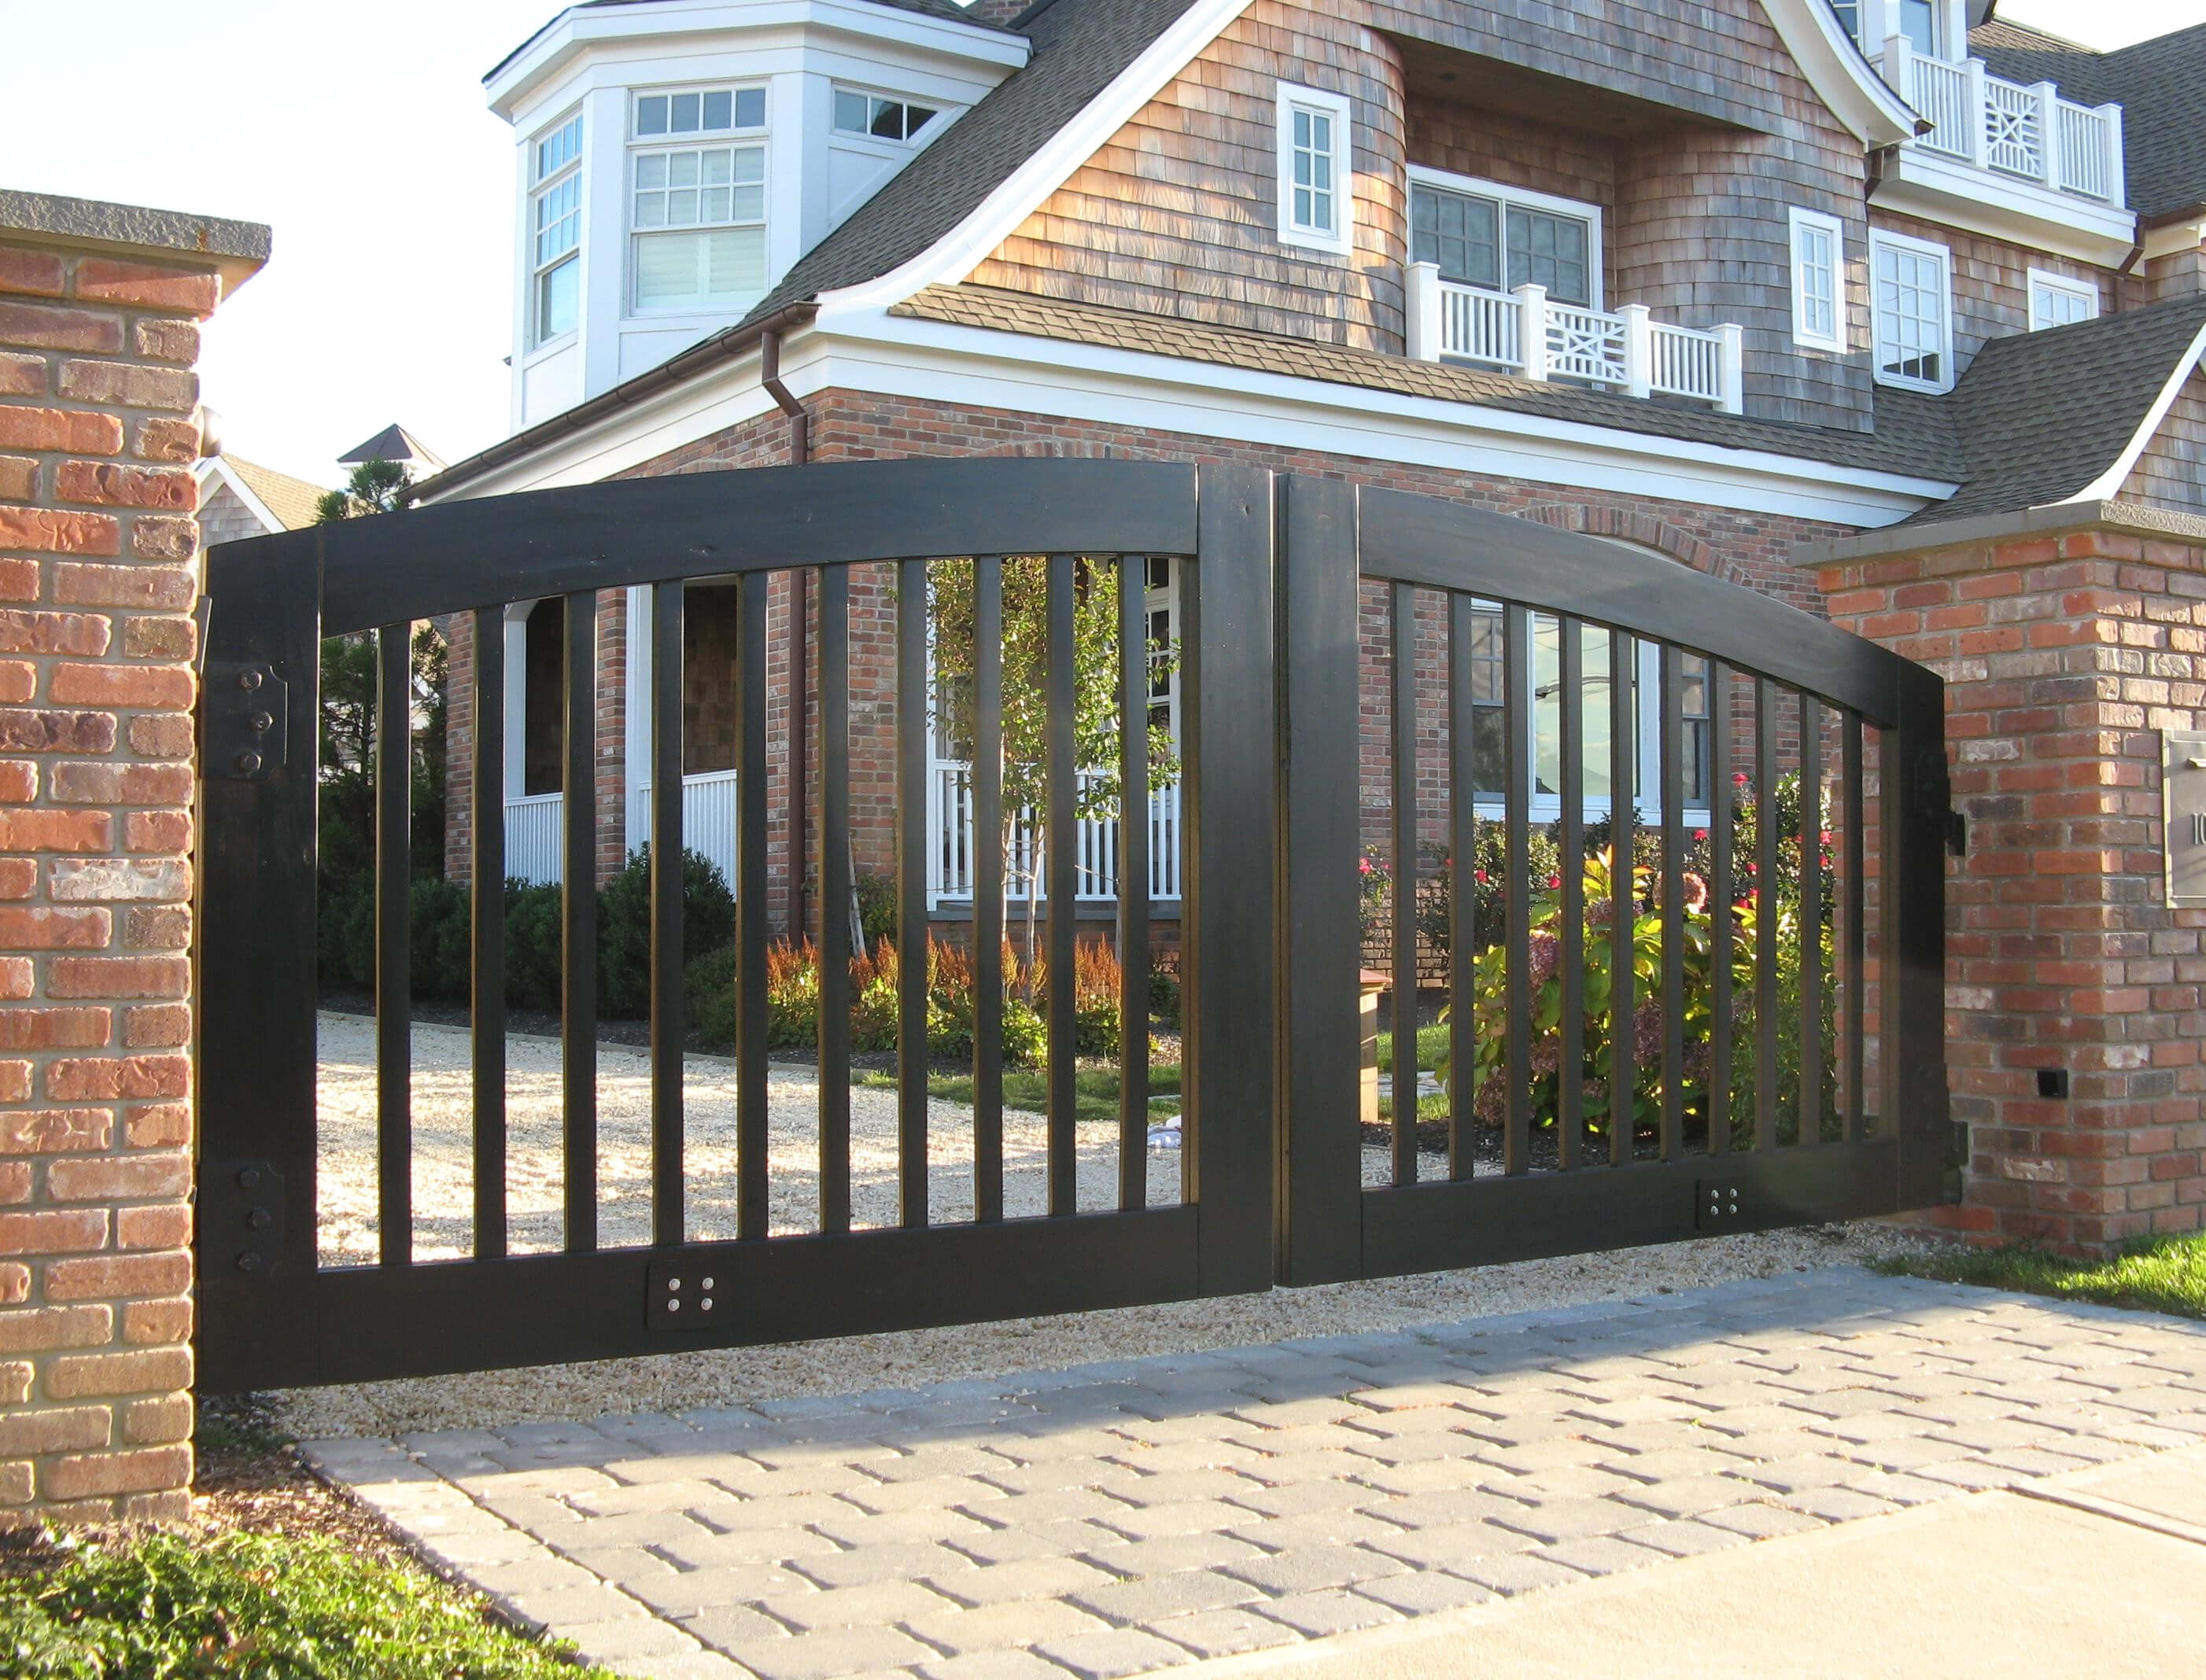 15 Simple Gate Design For Small House